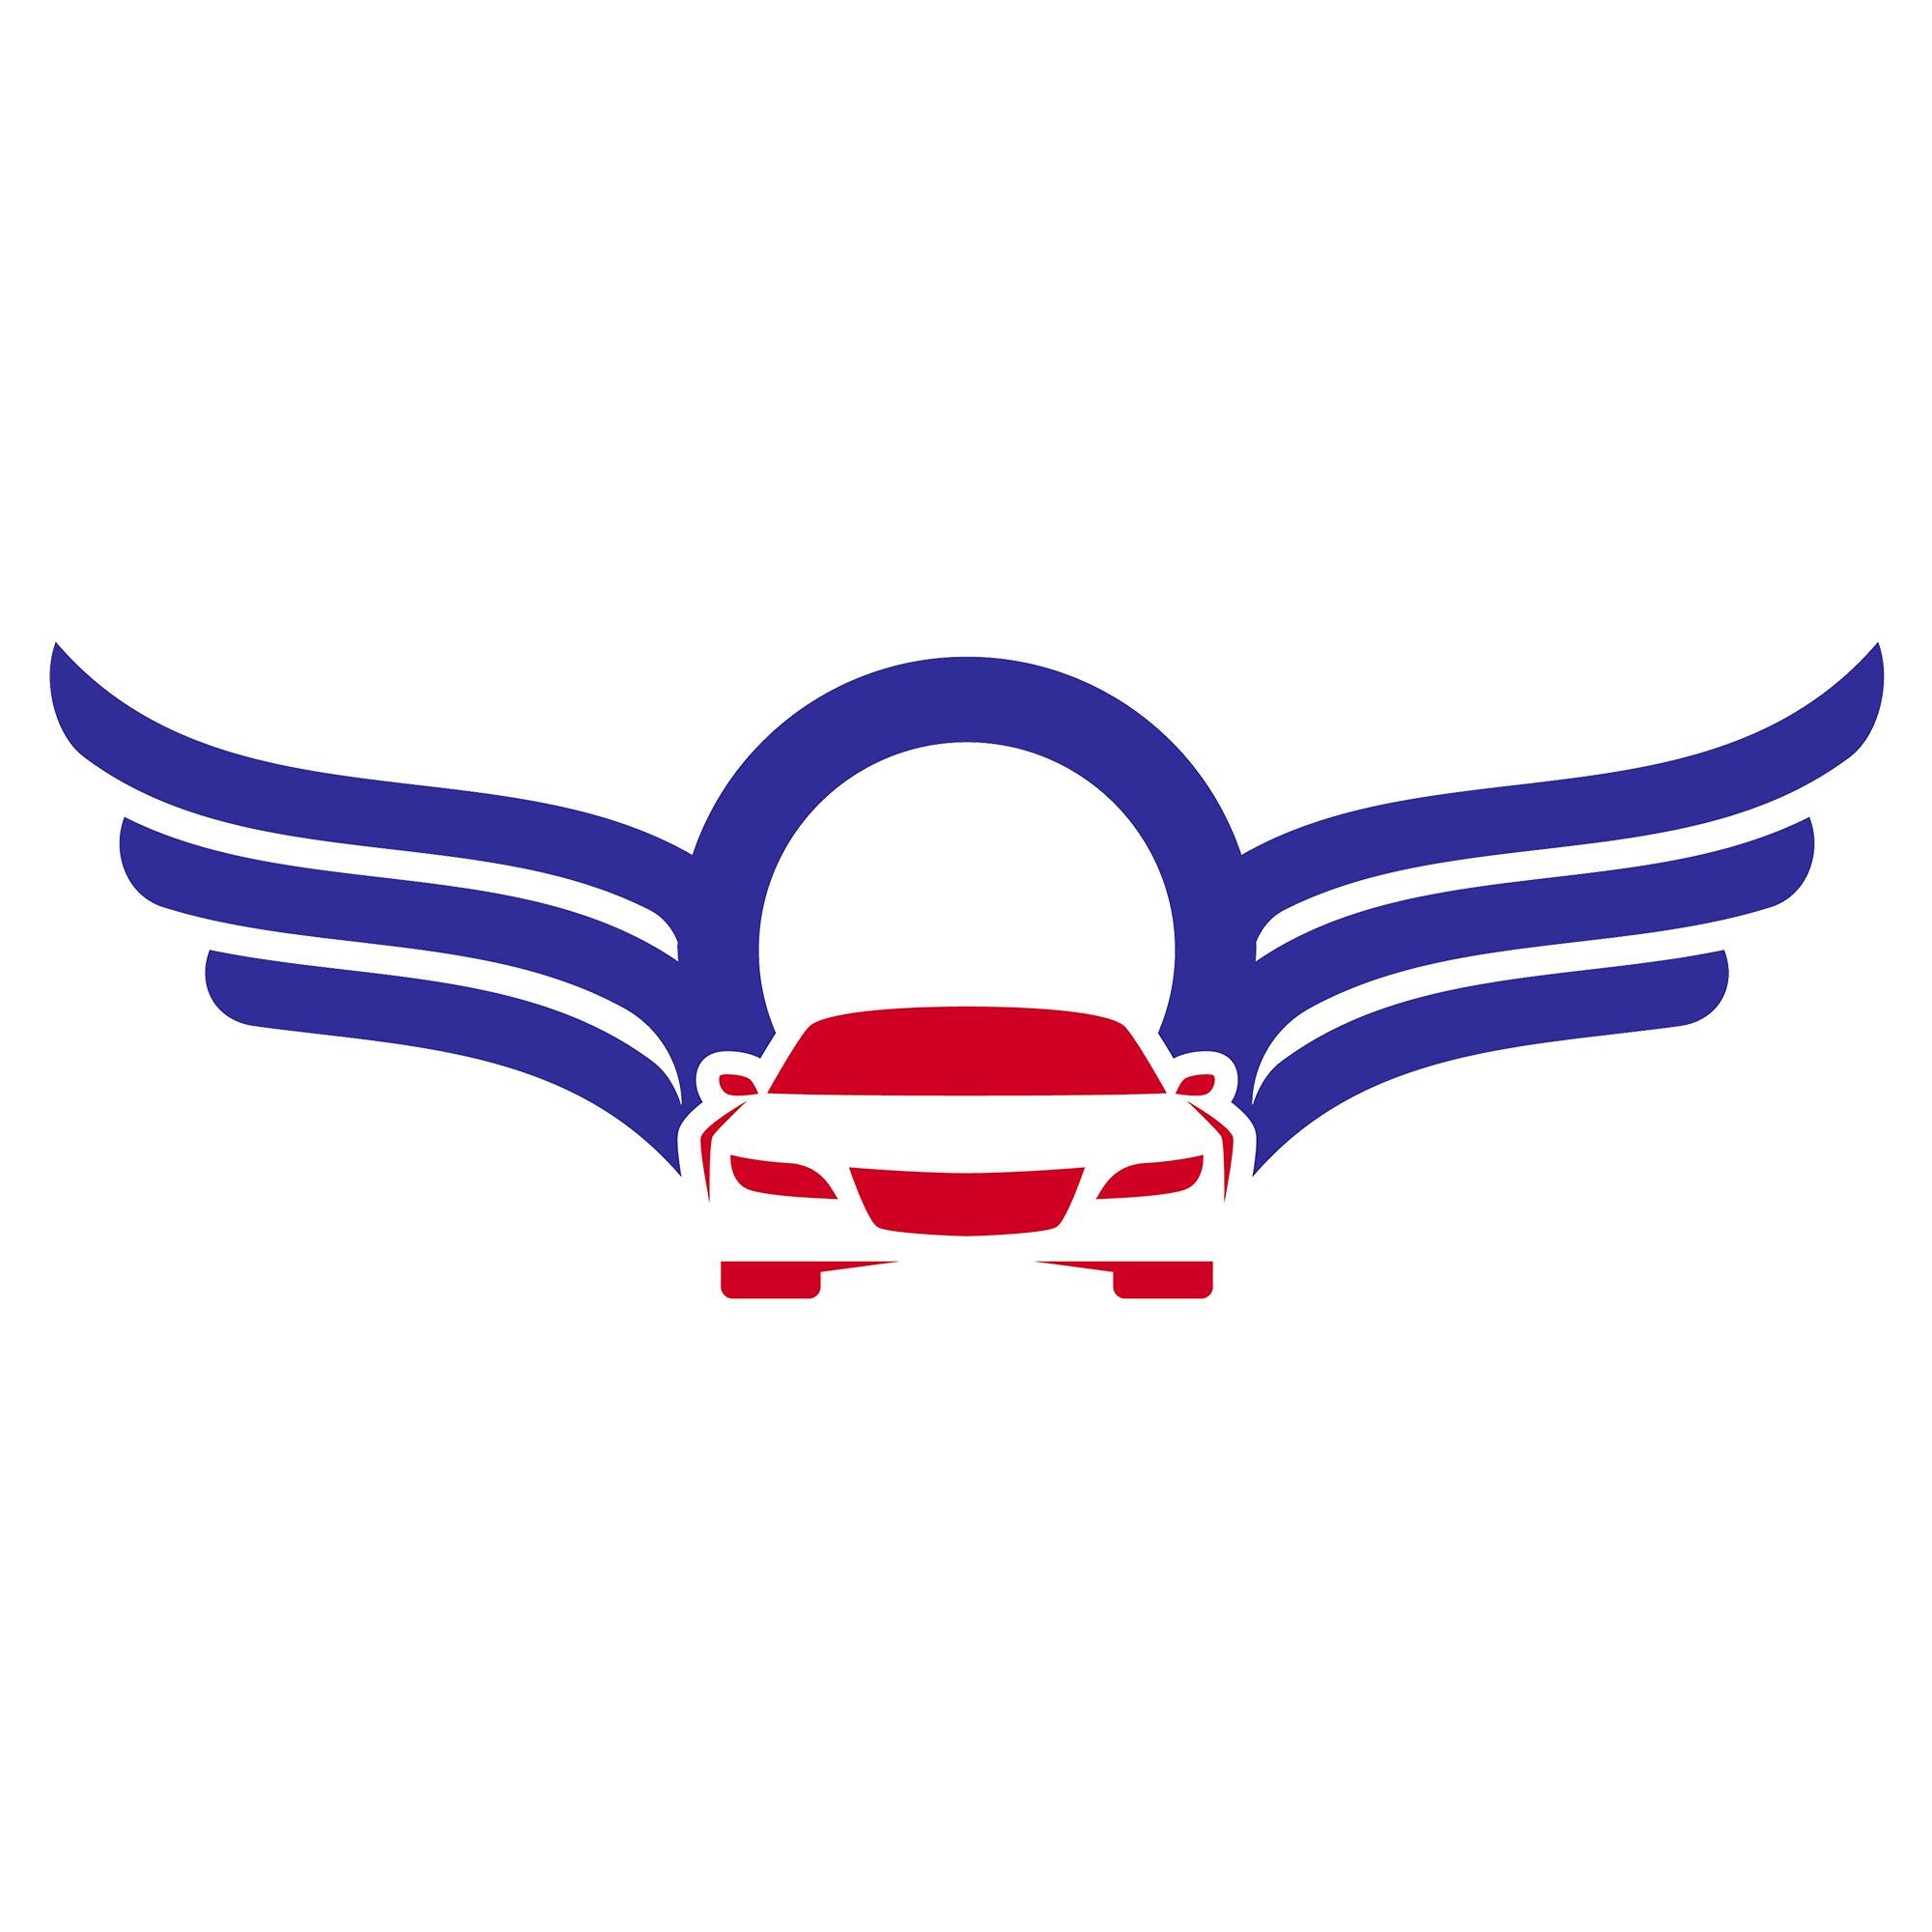 Owings Auto Logo